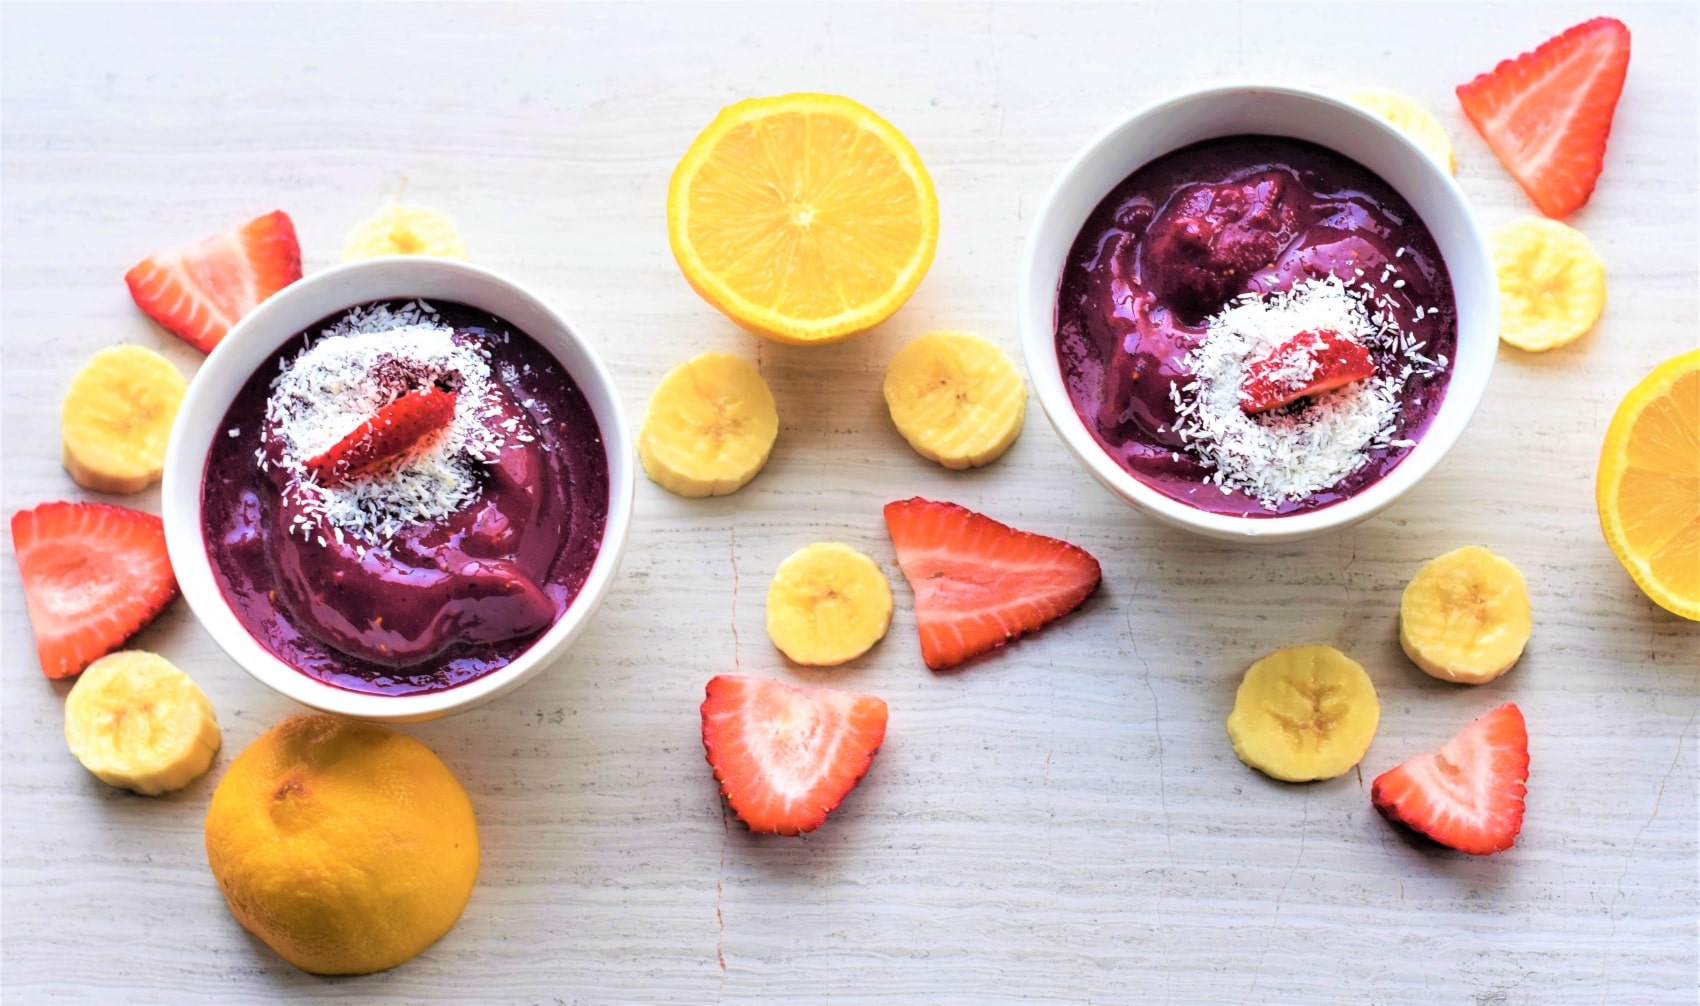 Post Workout Smoothie Bowl Ingredients and Superfoods